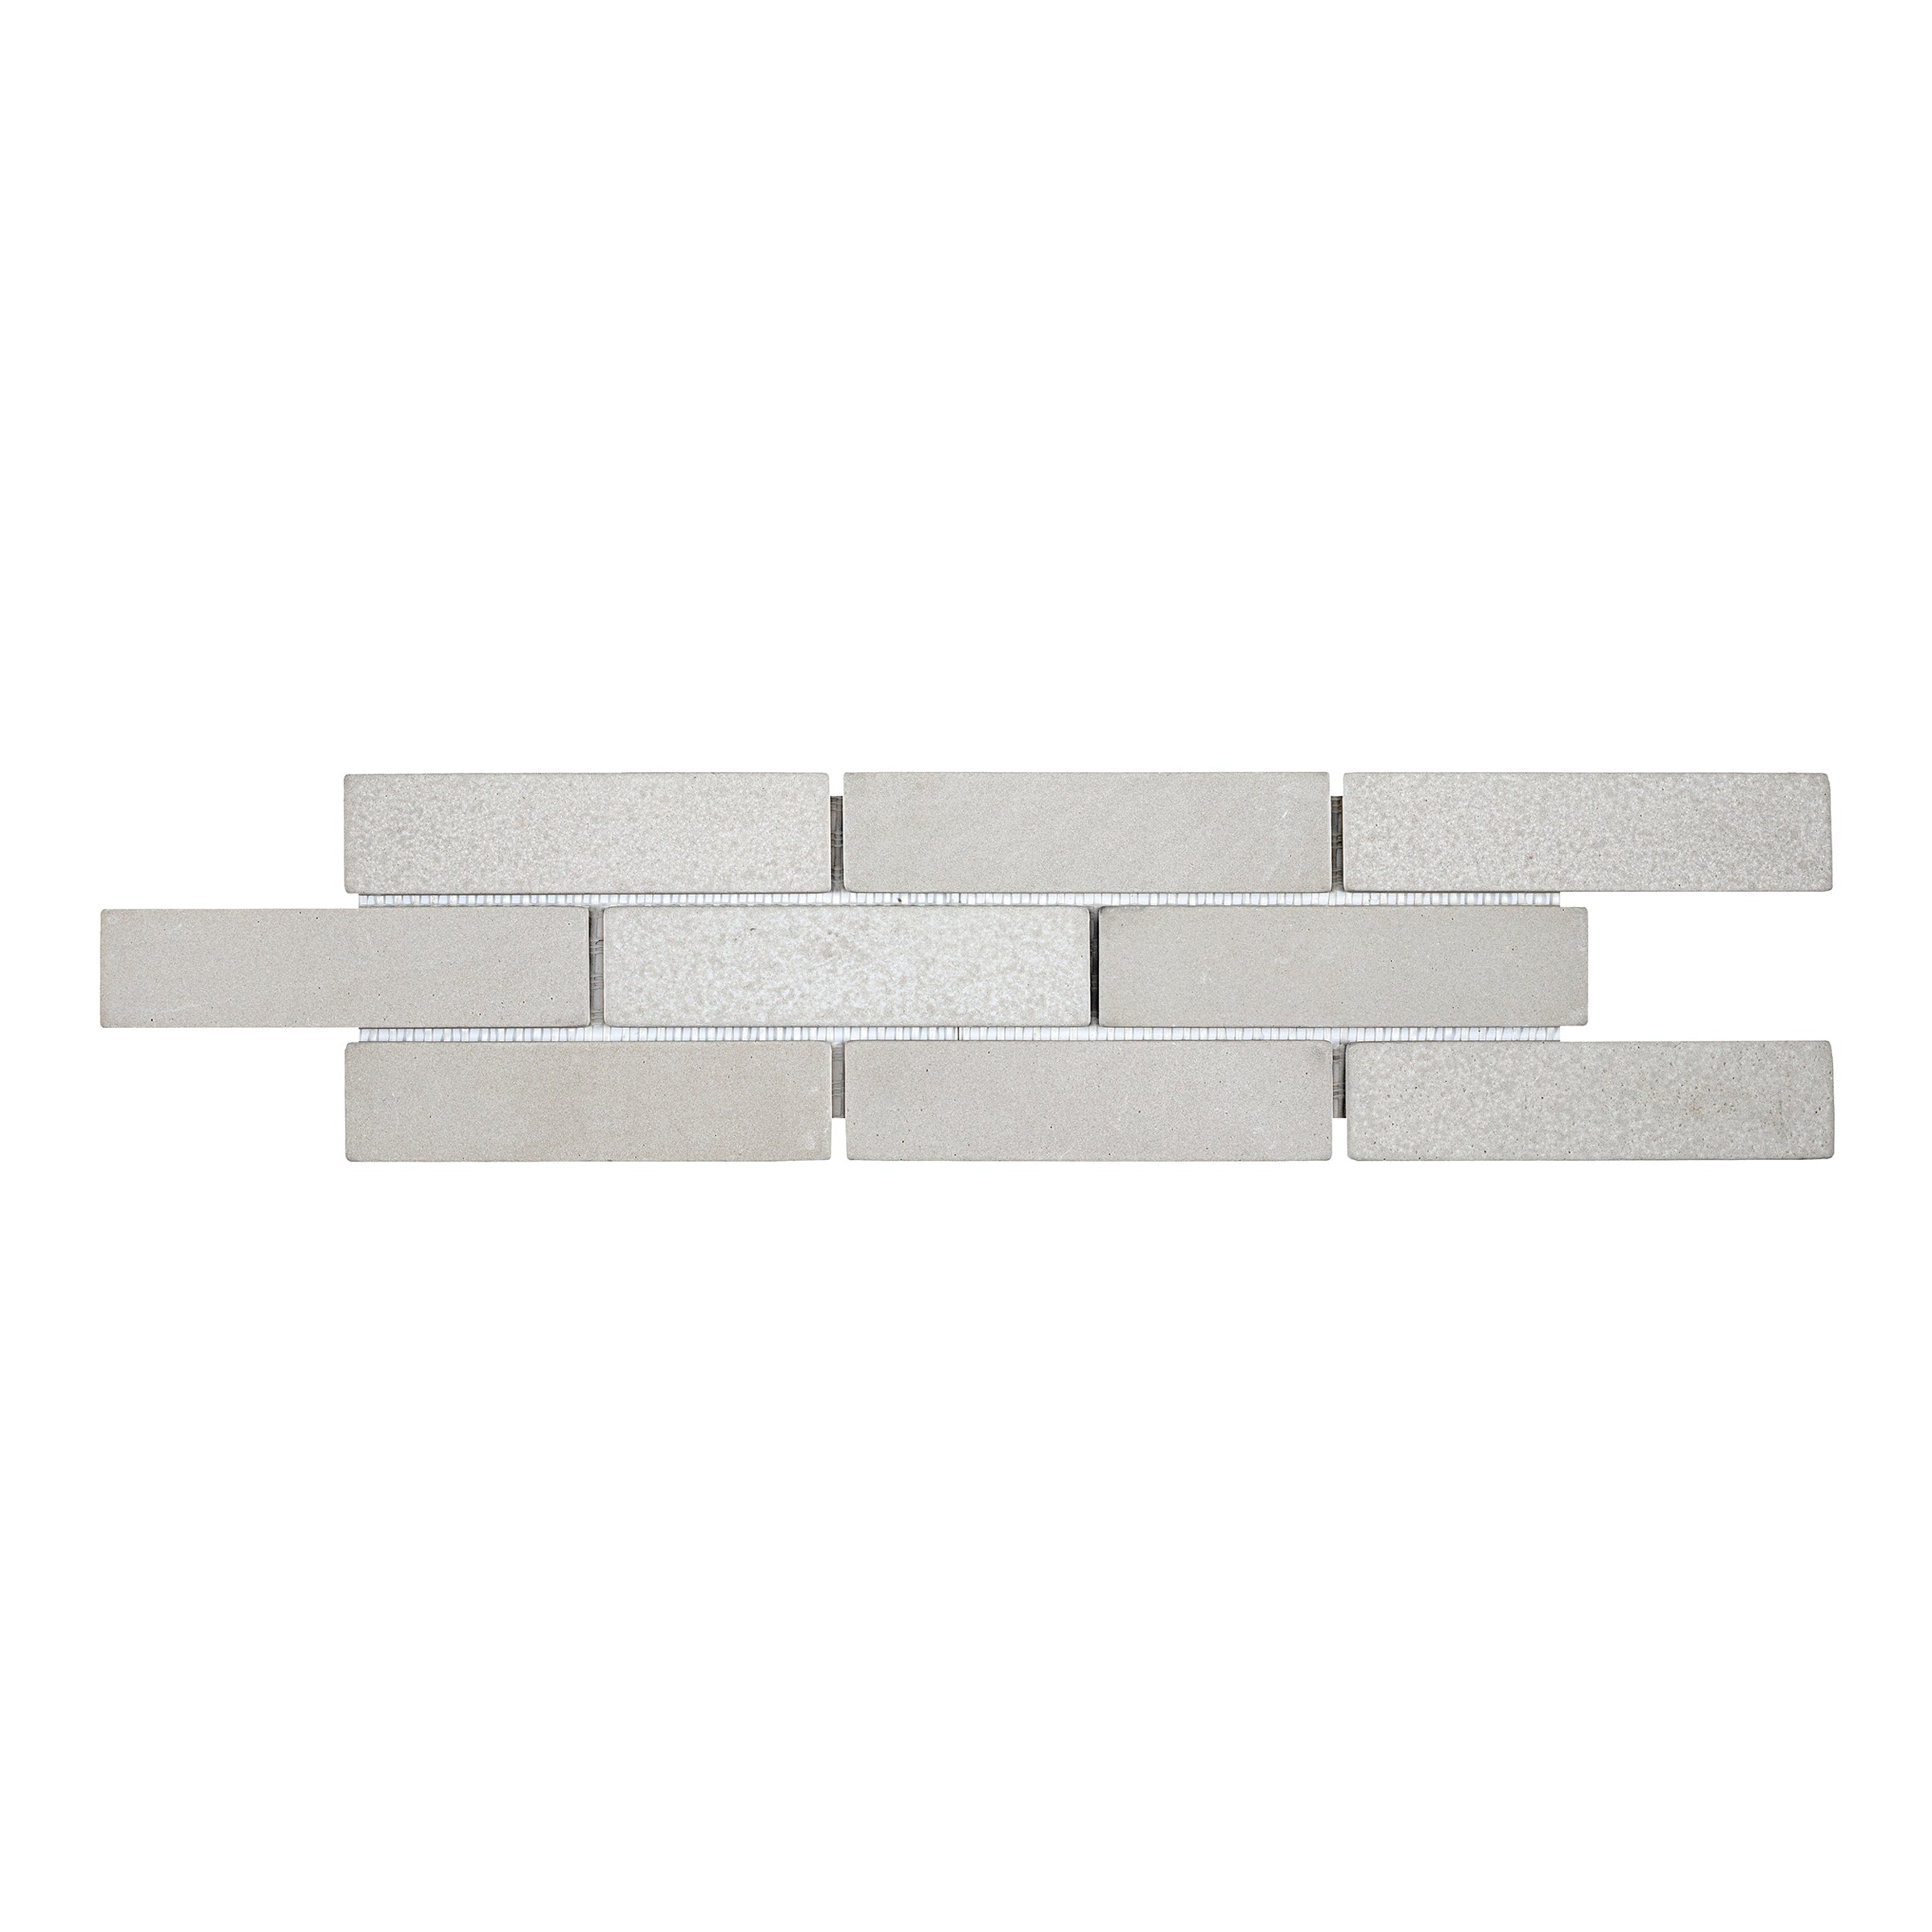 everest blend sandstone brick offset mosaic bush hammered tumbled linen concrete off white 2x8x3_8 product surface group natural stone resource